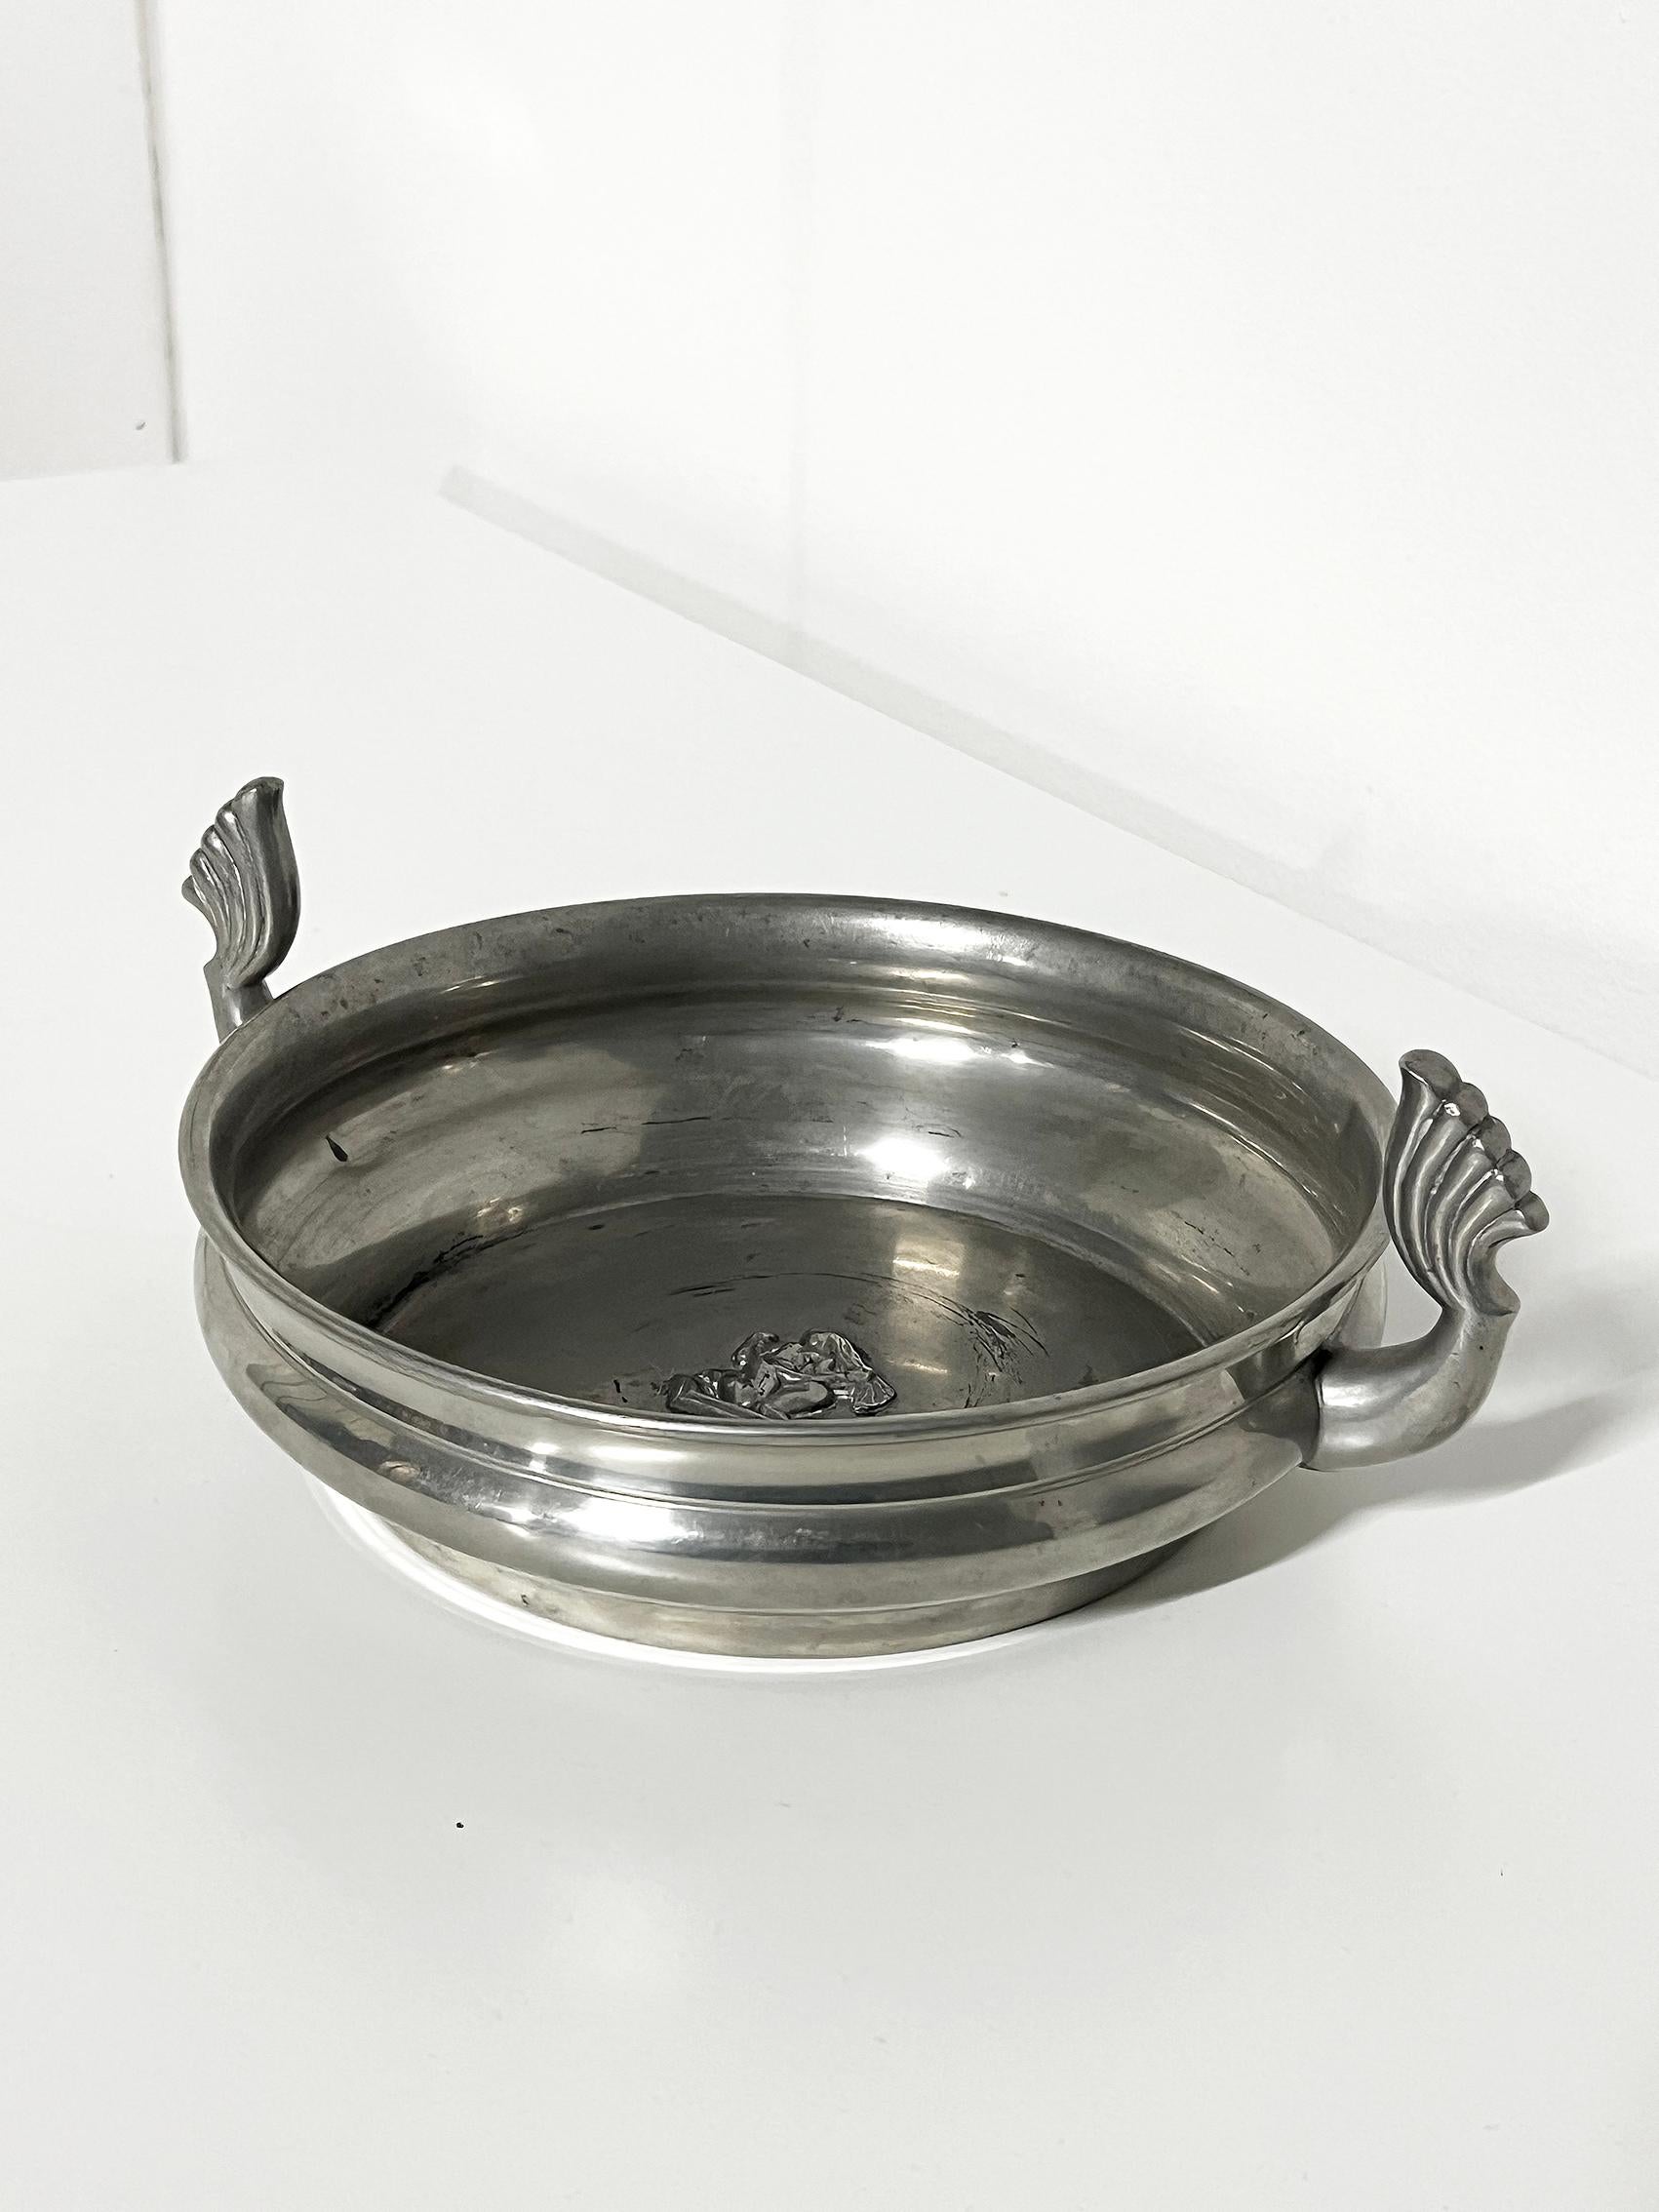 Rare bowl in pewter by CG Hallberg -1930.  
Signed with makers mark.  
Measurements: Diameter with handles 27 cm, diameter without the handles 21,2 cm, height 9,6 cm. 
Wear consistent with age and use. Pewter patina, marks, scratches and dents.